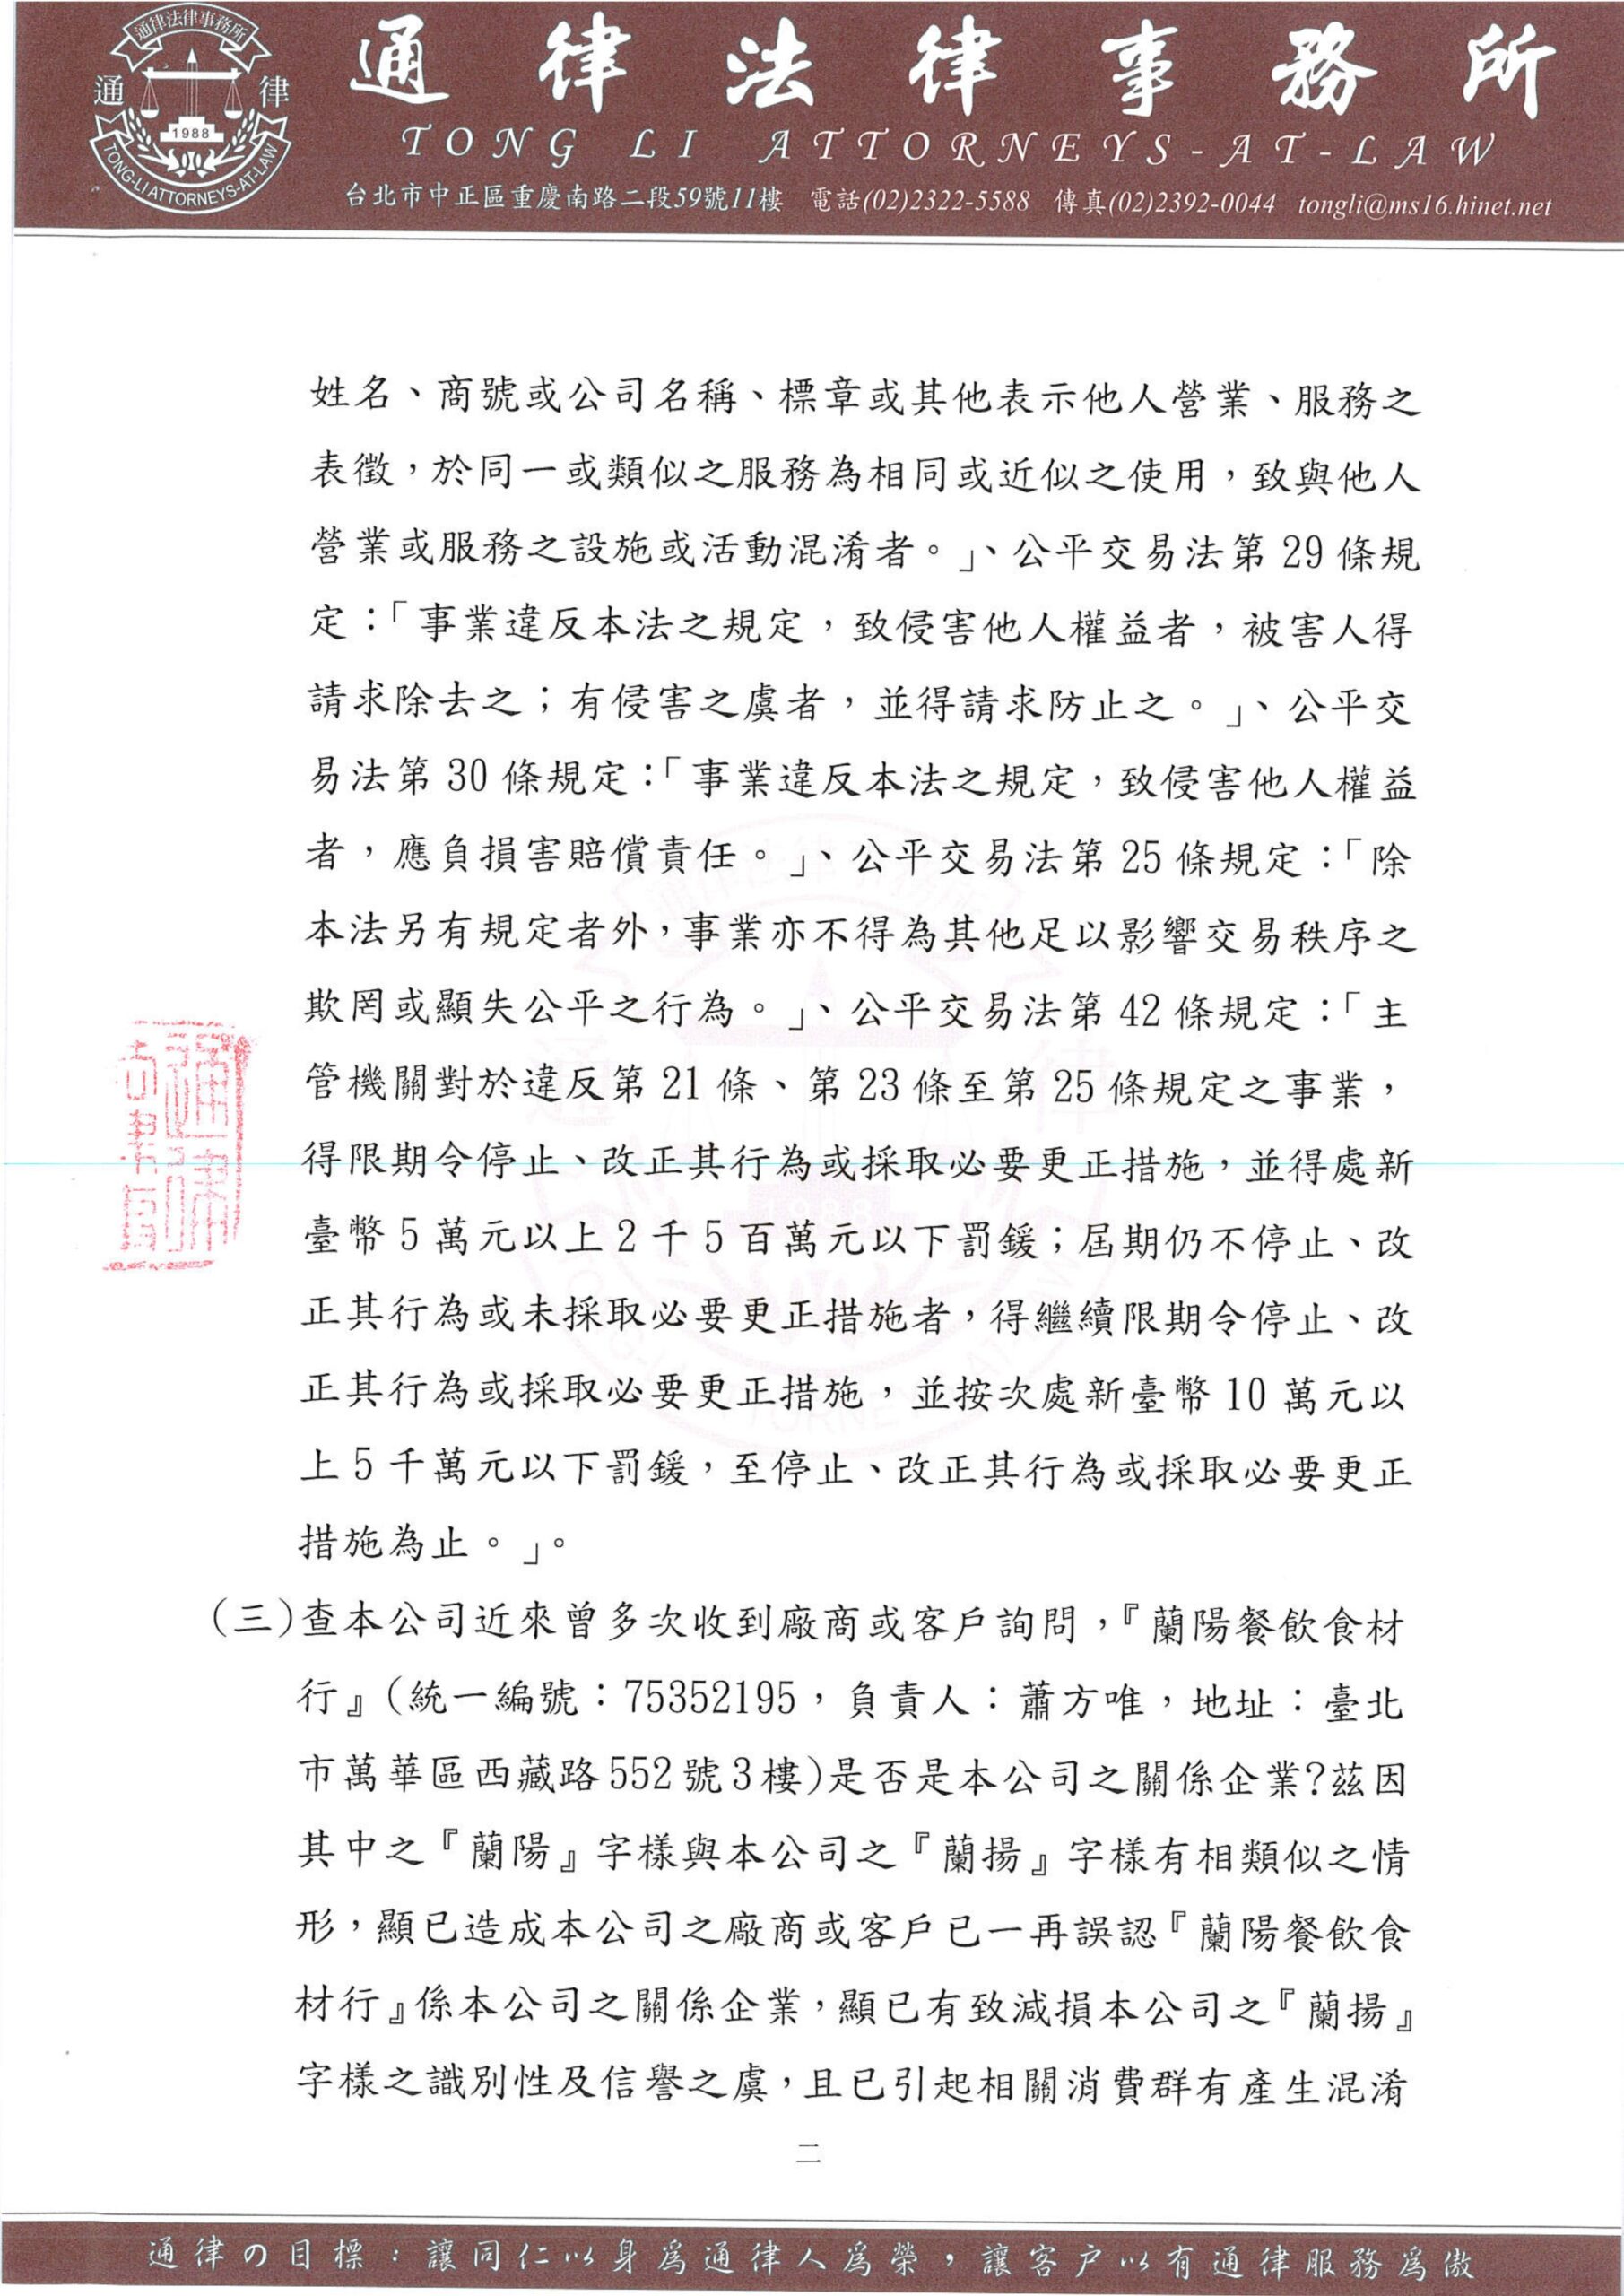 Lanyang Catering Materials Co., Ltd._Lawyer Letter 230331 영수증_페이지-0002